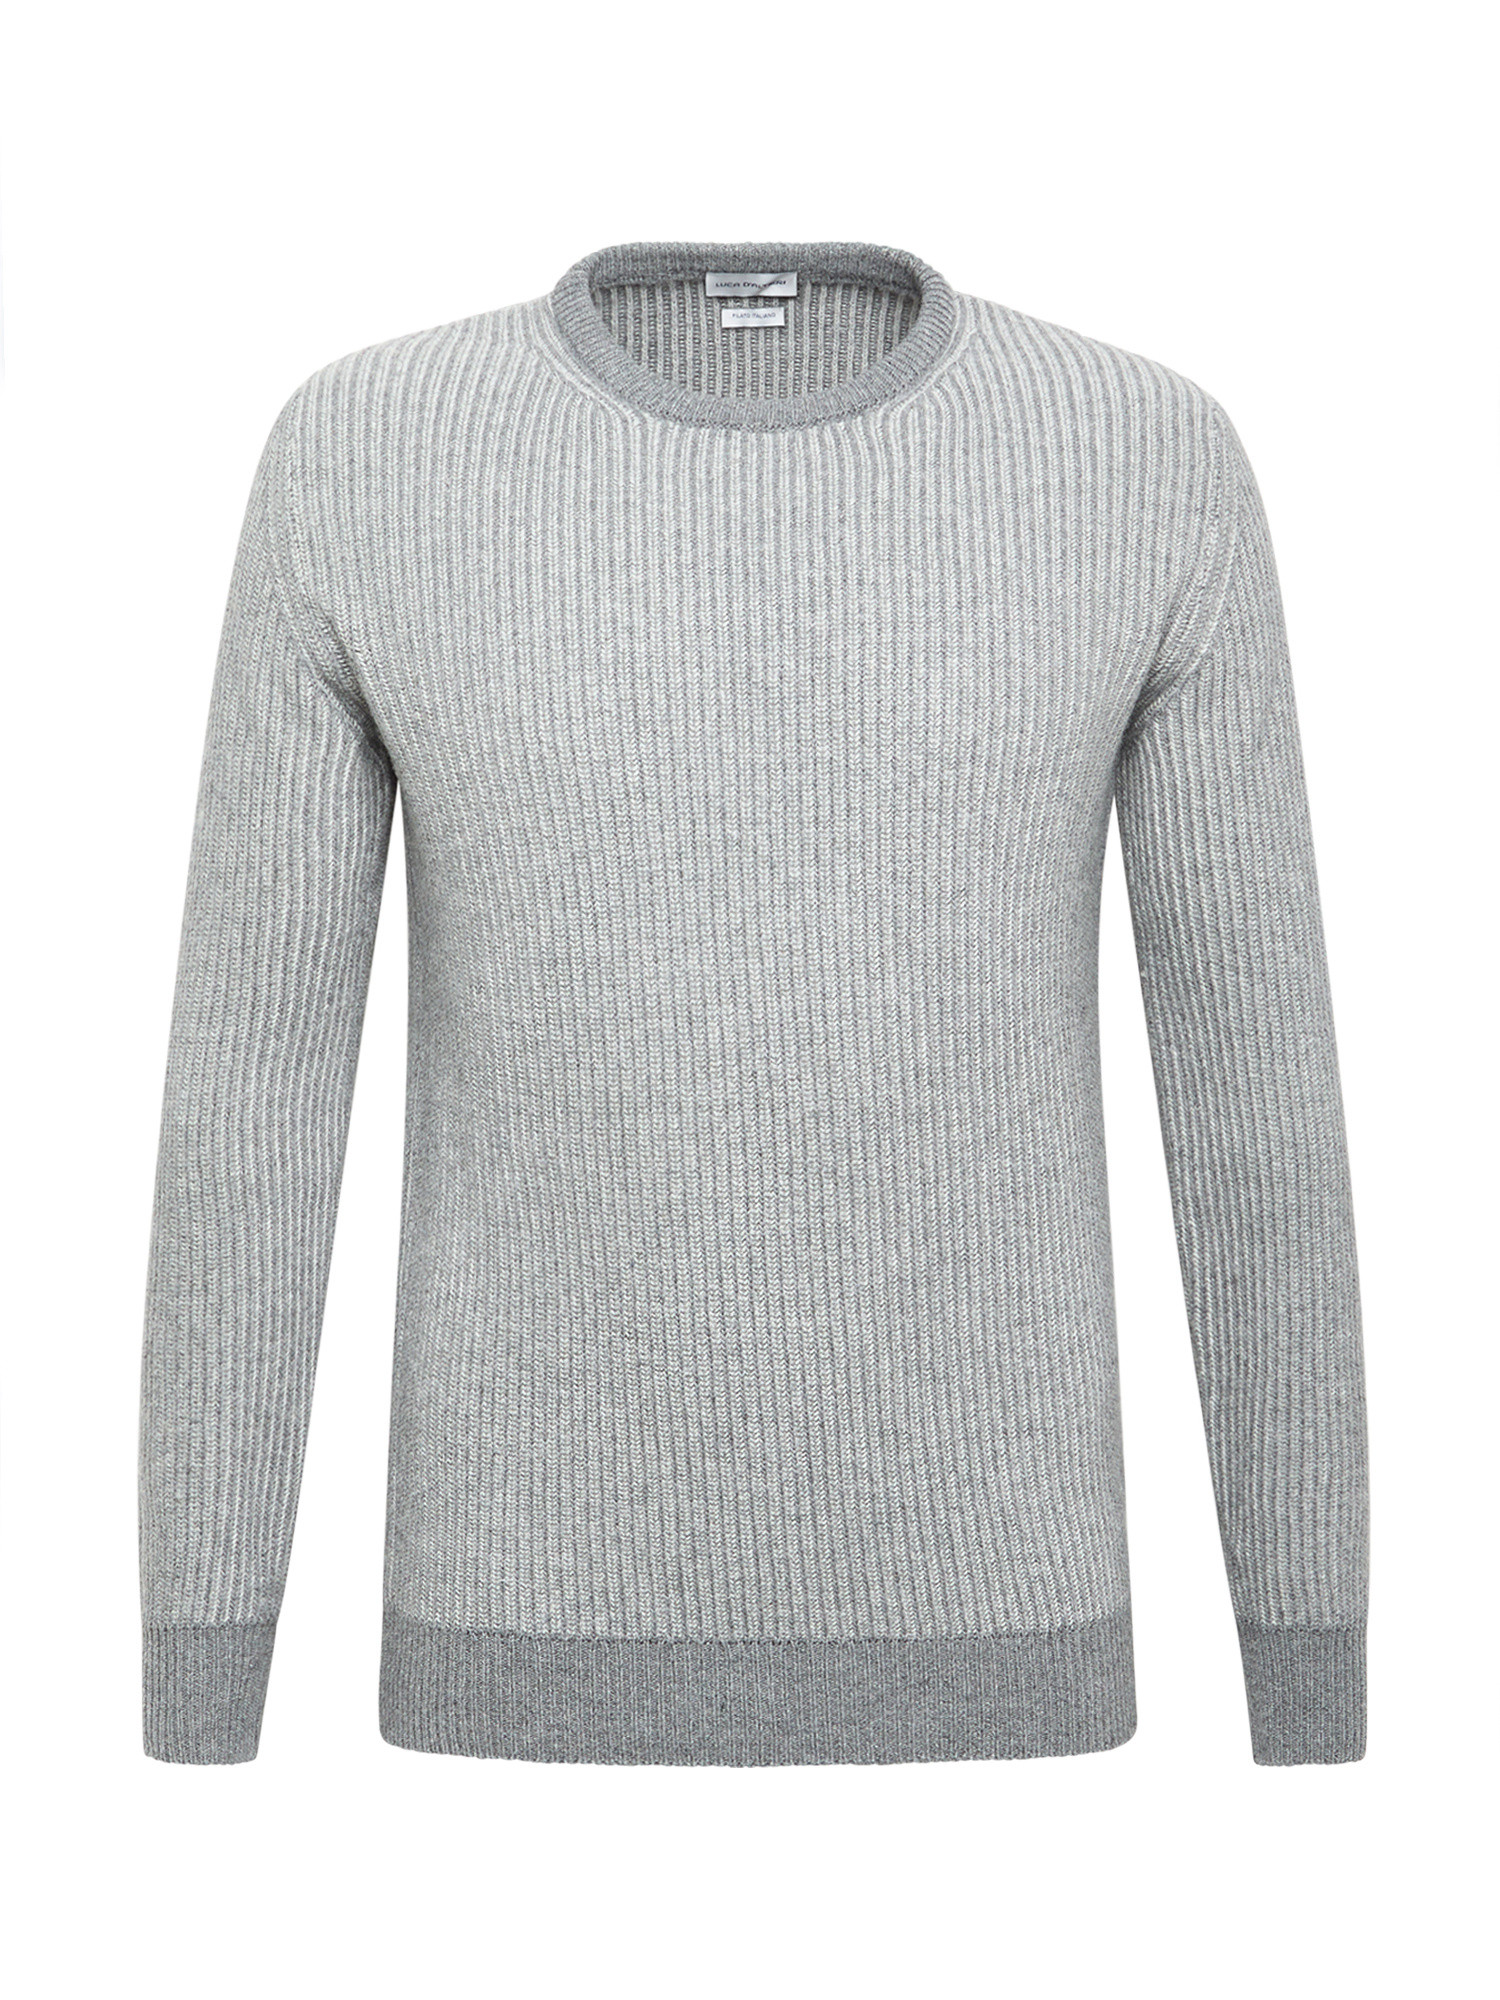 Luca D'Altieri - Cashmere blend crew neck sweater with noble fibres, Pearl Grey, large image number 0